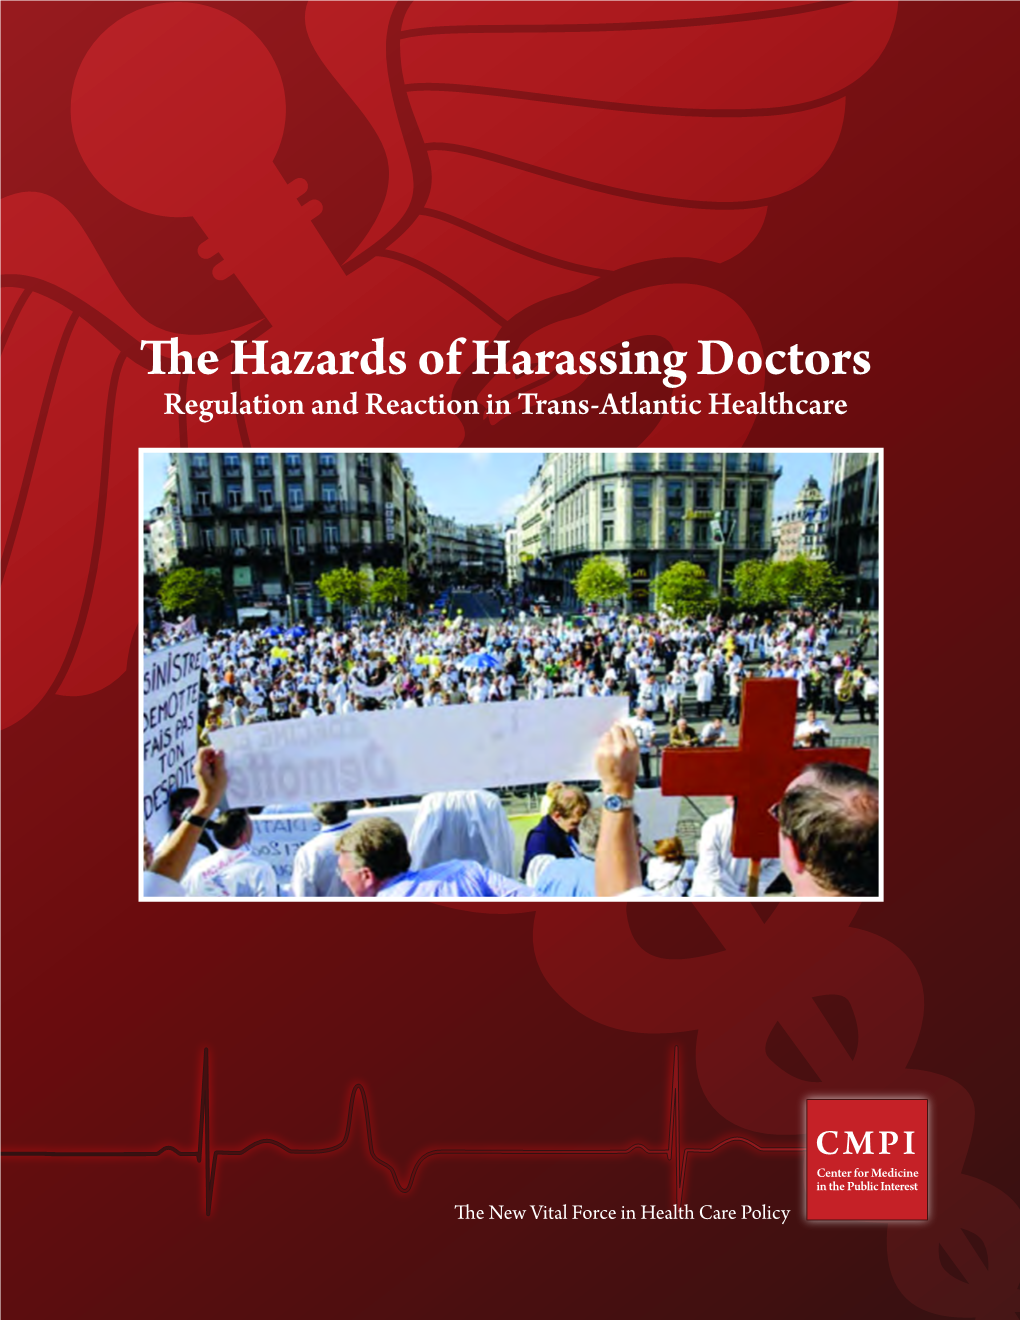 The Hazards of Harassing Doctors: Regulation and Reaction